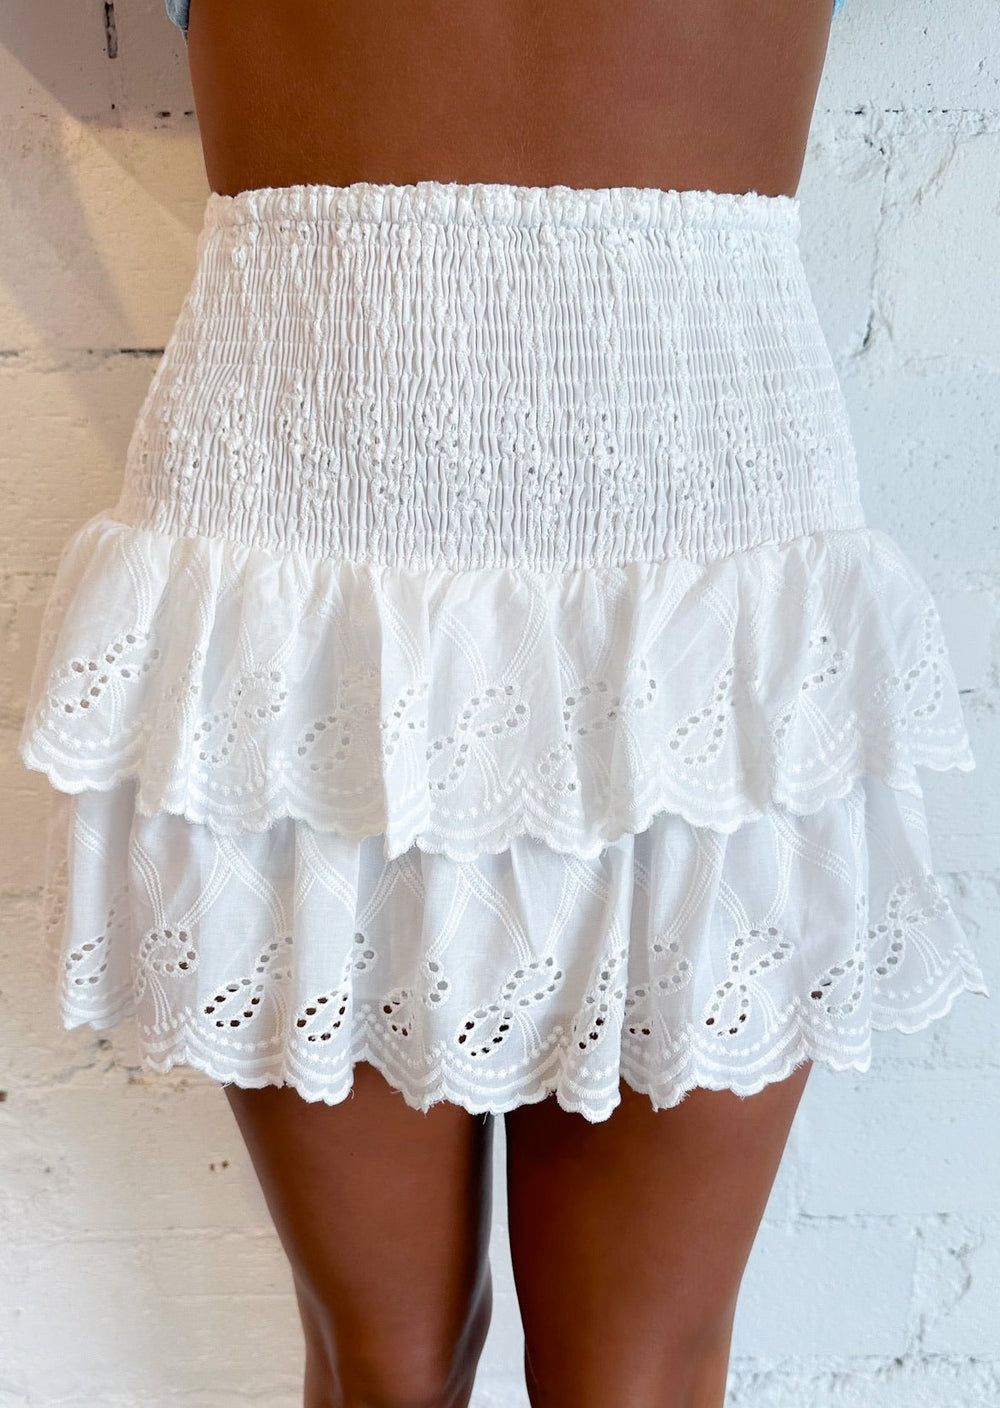 So Angelic Skirt, Skirts, Adeline, Adeline, dallas boutique, dallas texas, texas boutique, women's boutique dallas, adeline boutique, dallas boutique, trendy boutique, affordable boutique